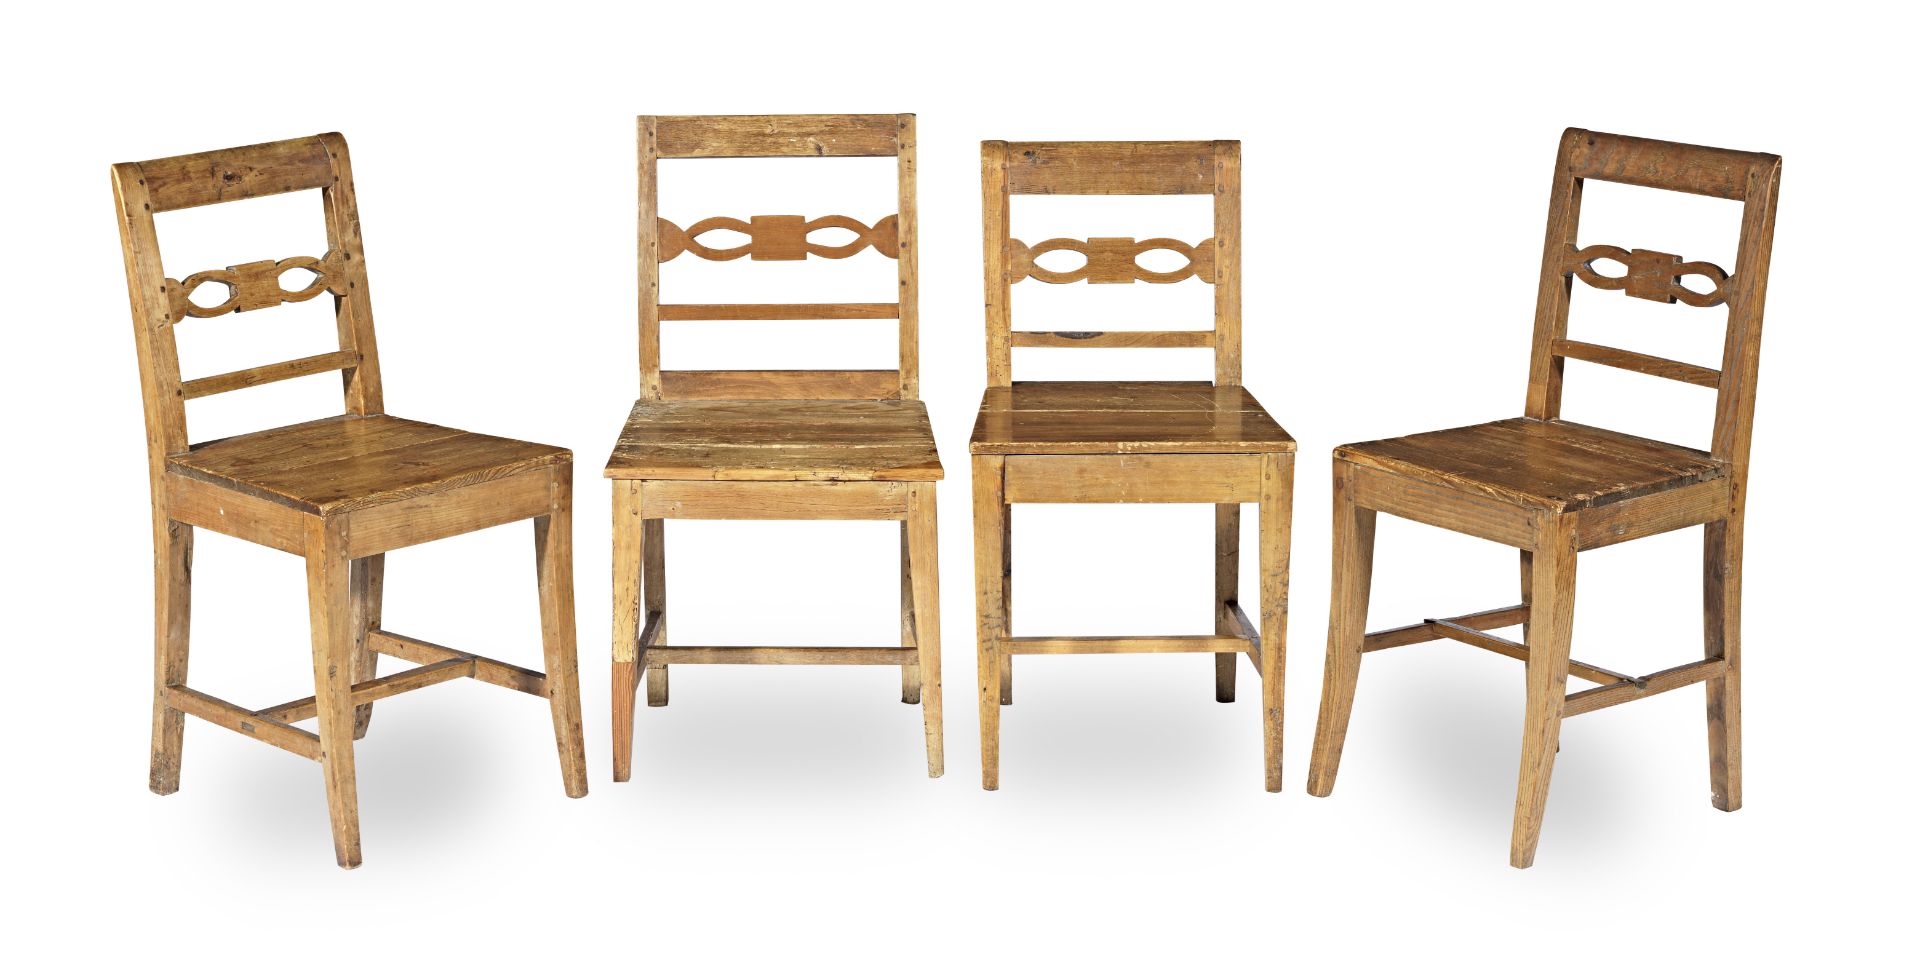 A set of four 19th century pine kitchen chairs